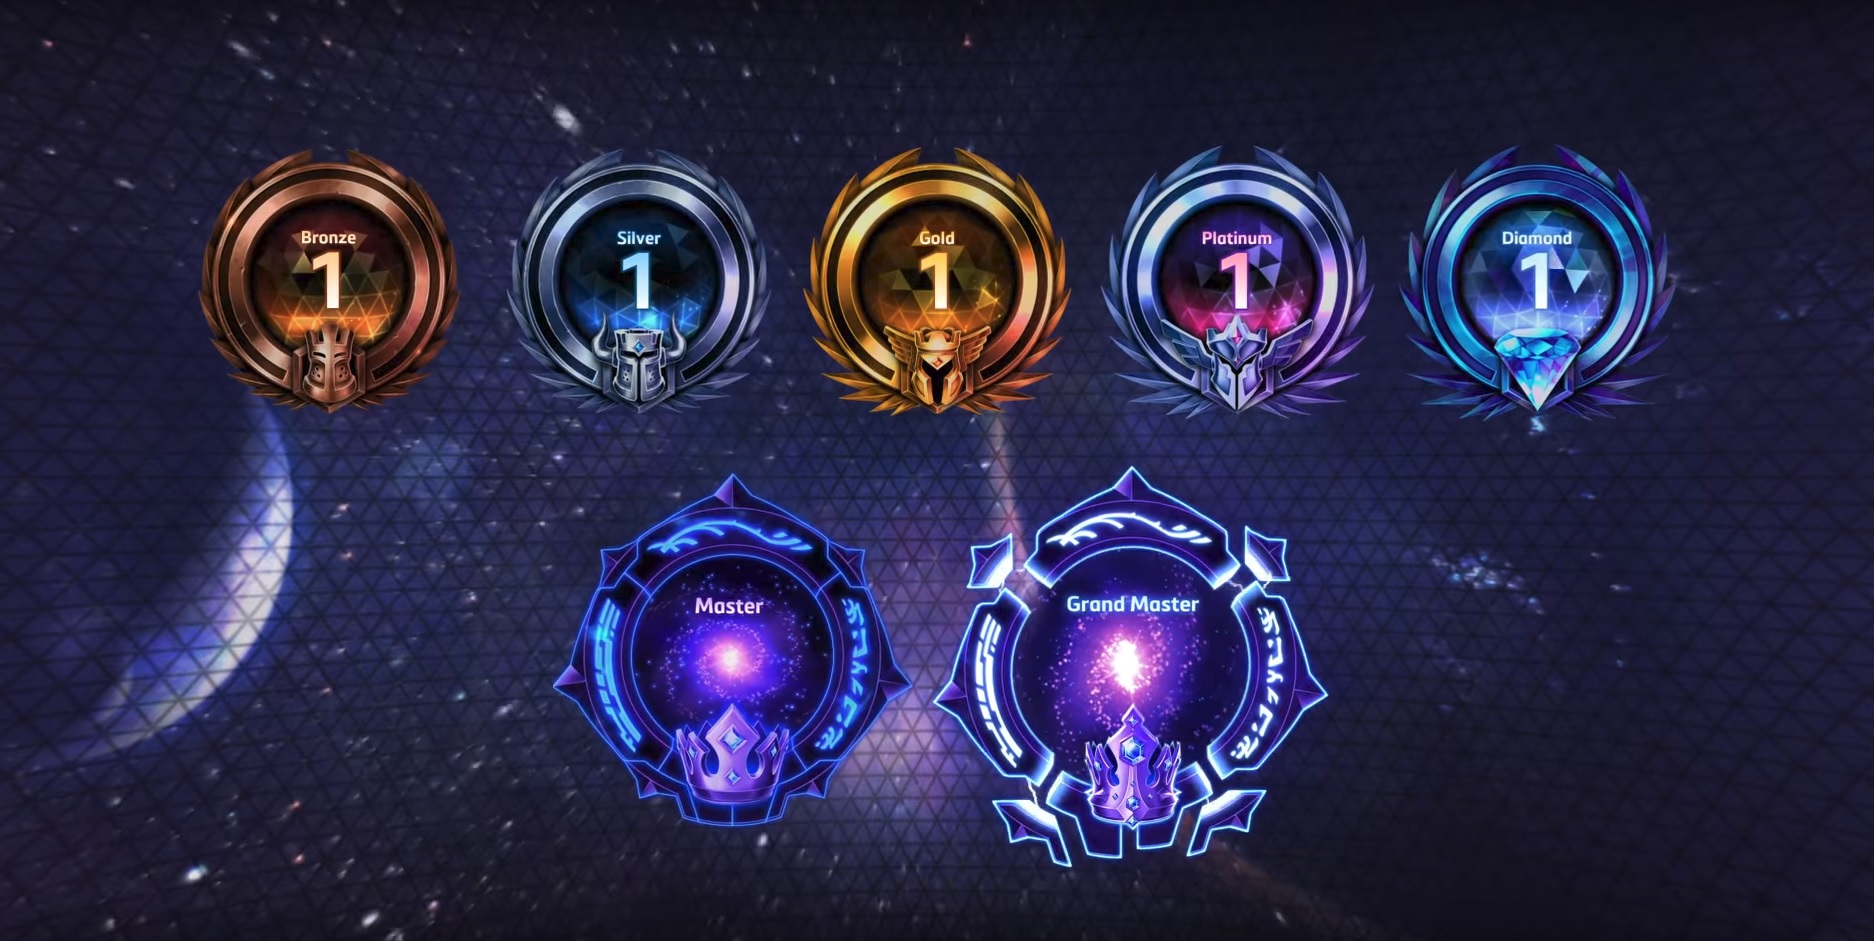 Heroes of the Storm Net Wins